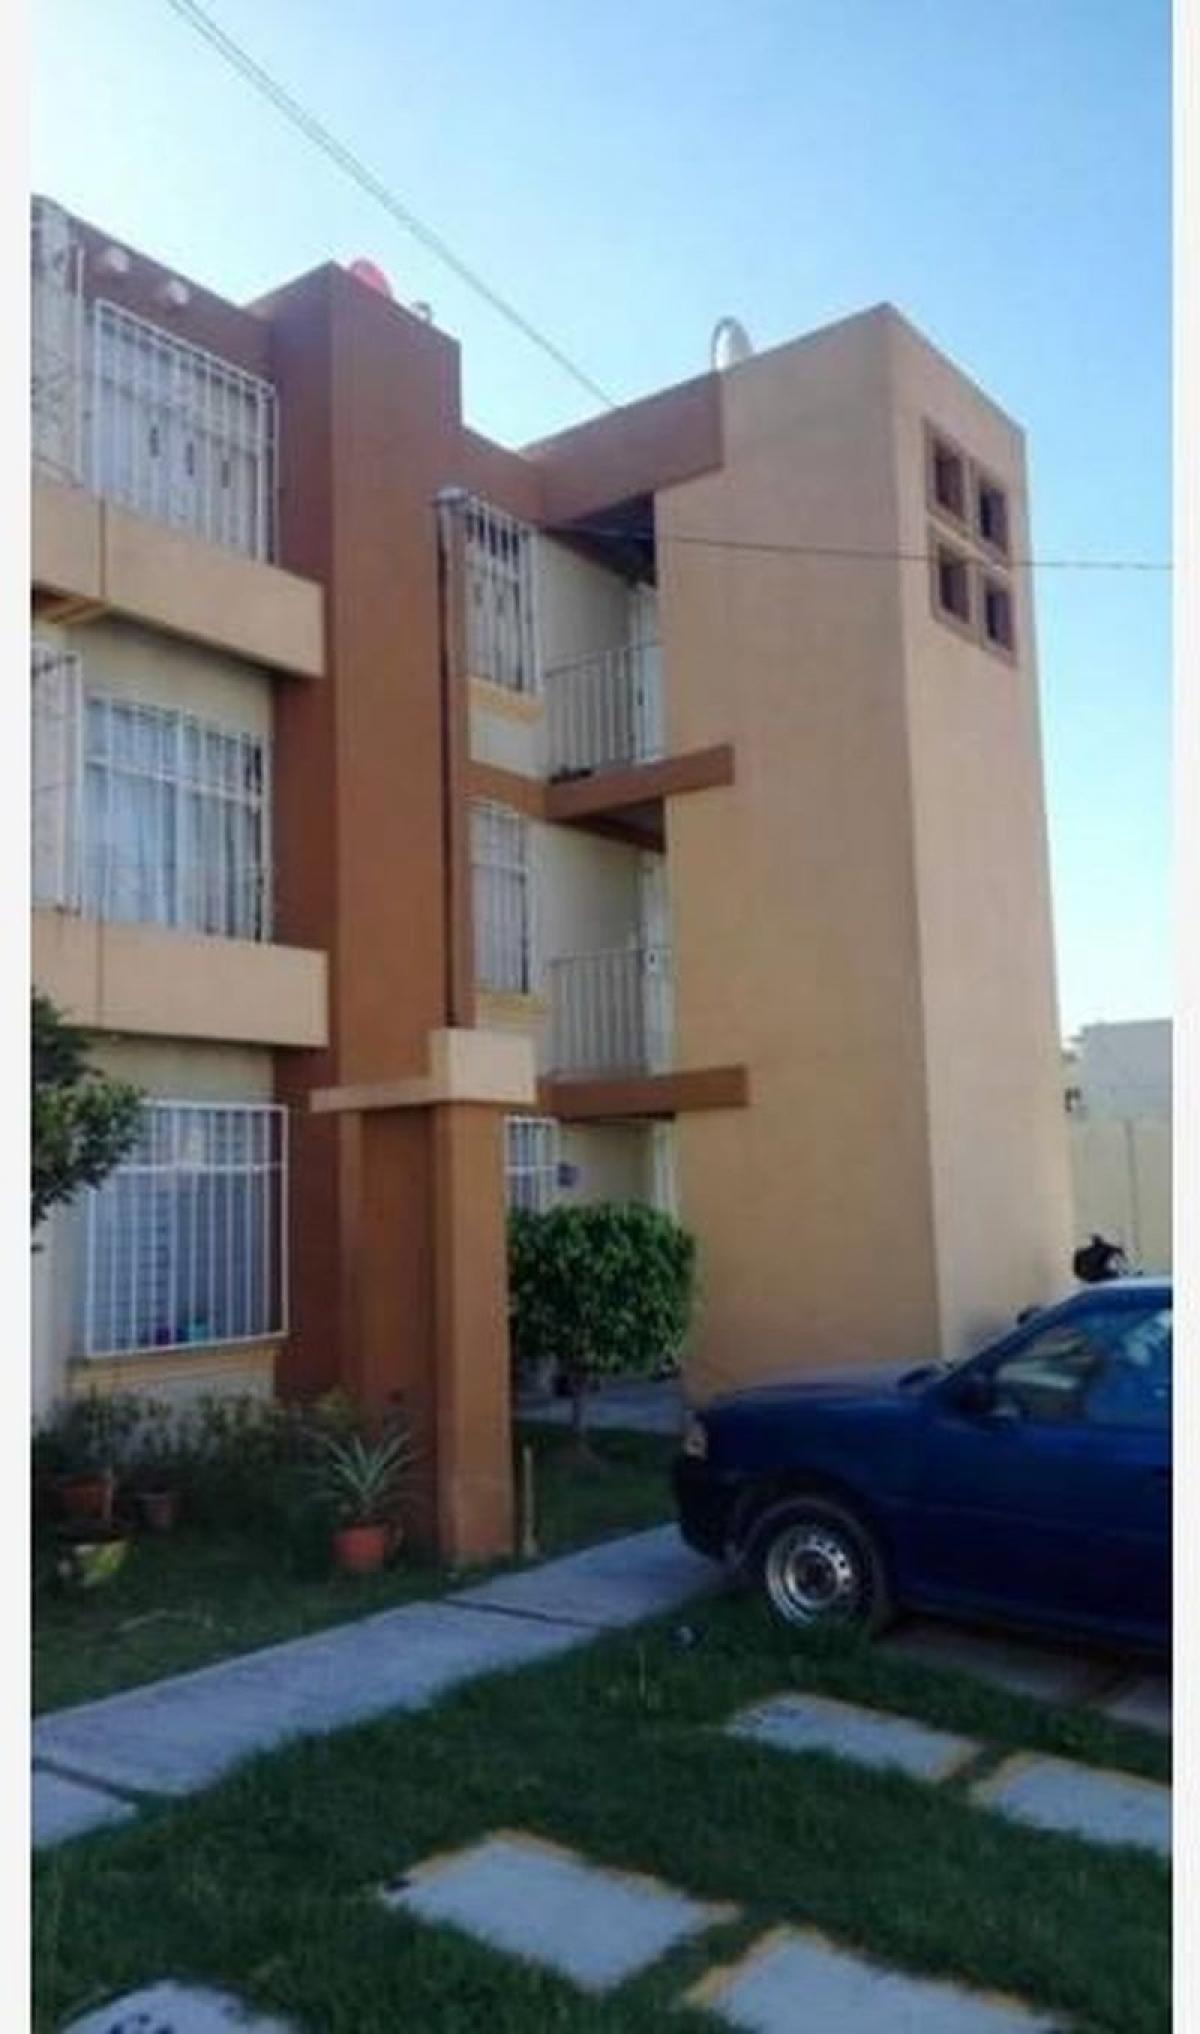 Picture of Apartment For Sale in Tecamac, Mexico, Mexico